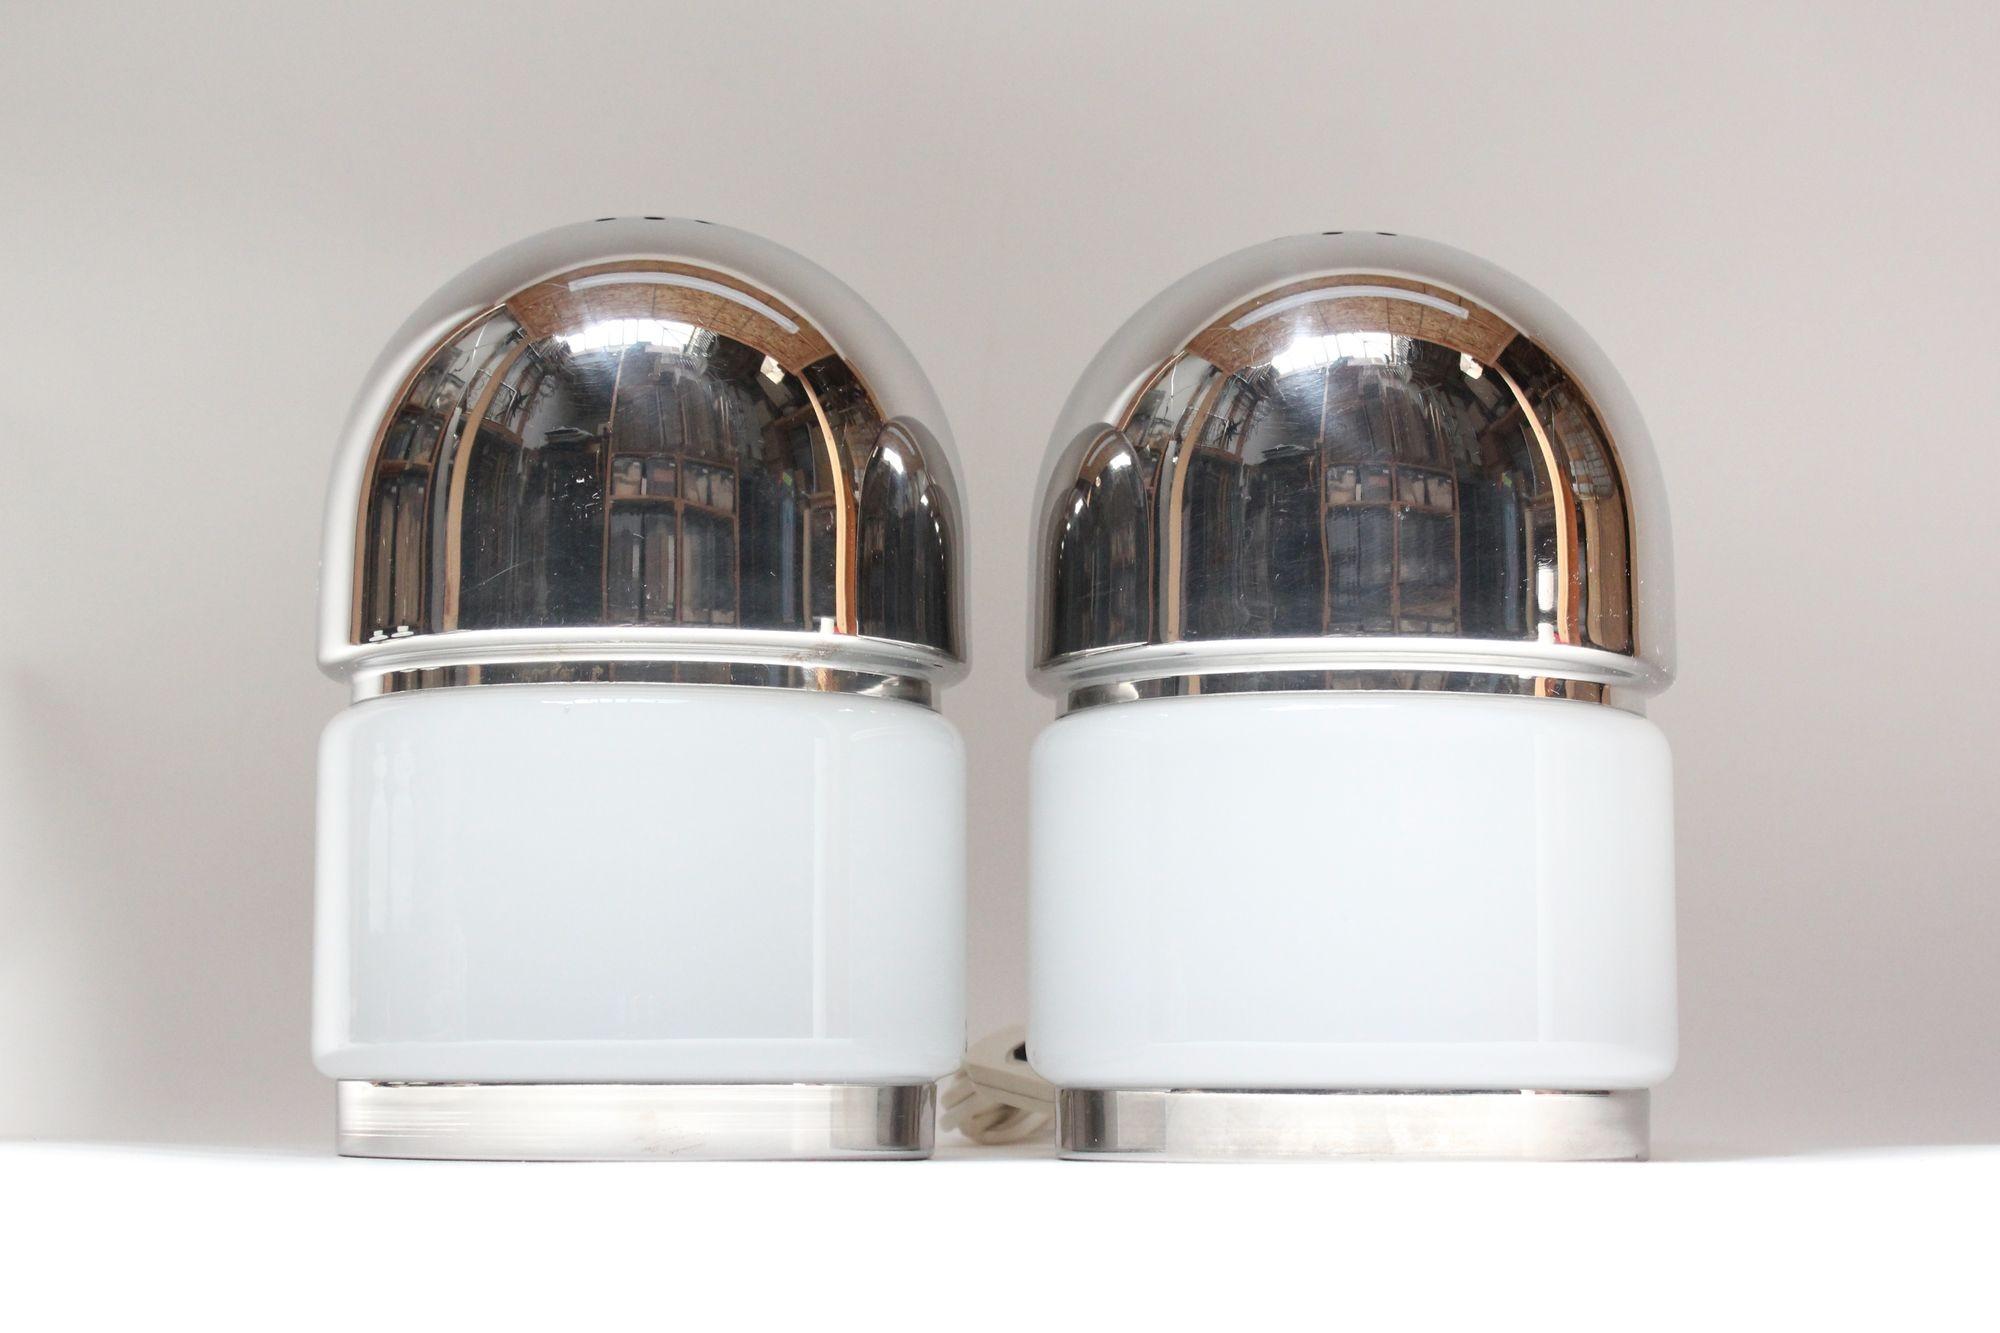 Pair of Italian Modernist salt and pepper-form/capsule table lamps designed ca. 1970 by Goffredo Reggiani. Features cased Murano glass supported by chrome bases and perforated chrome domes.
